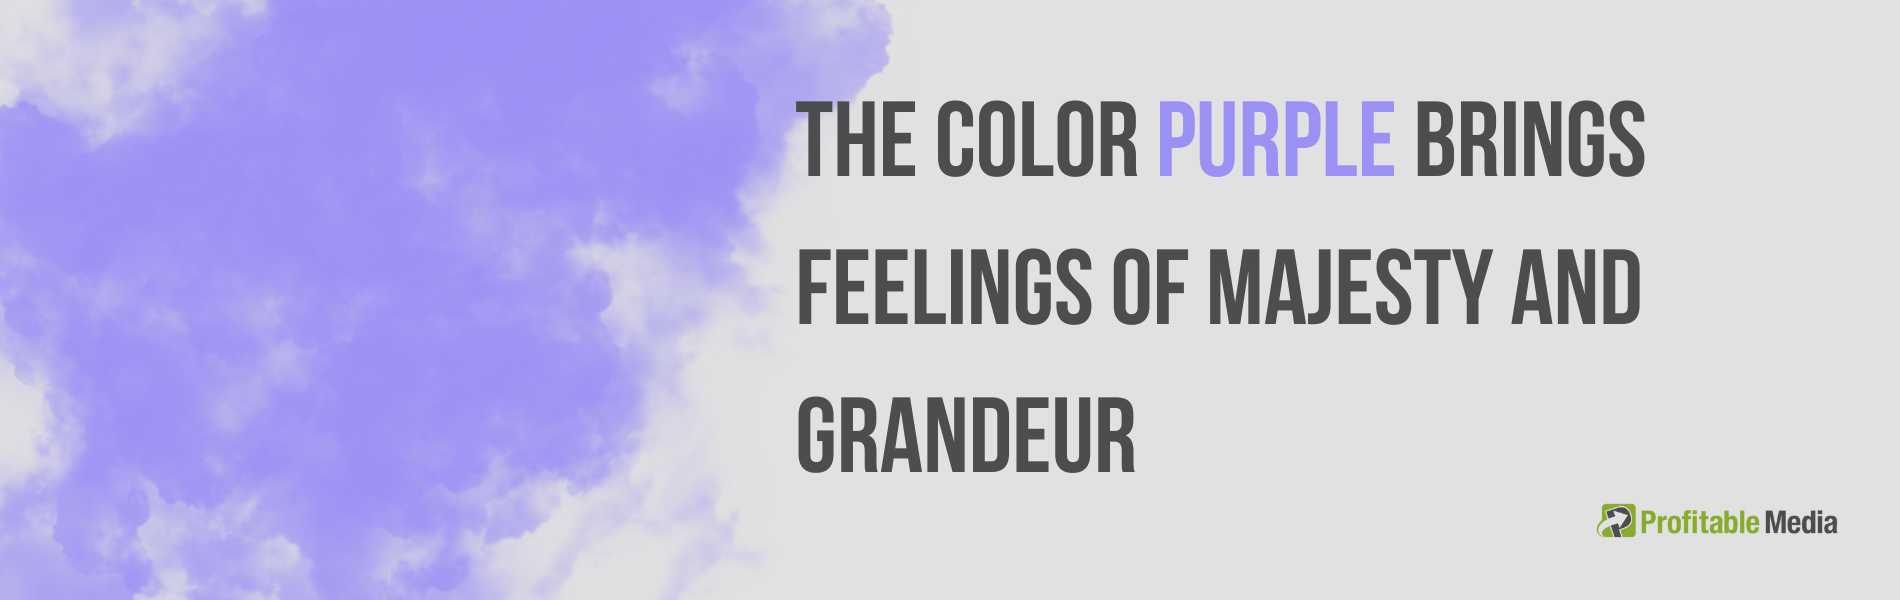 The meaning of the color purple